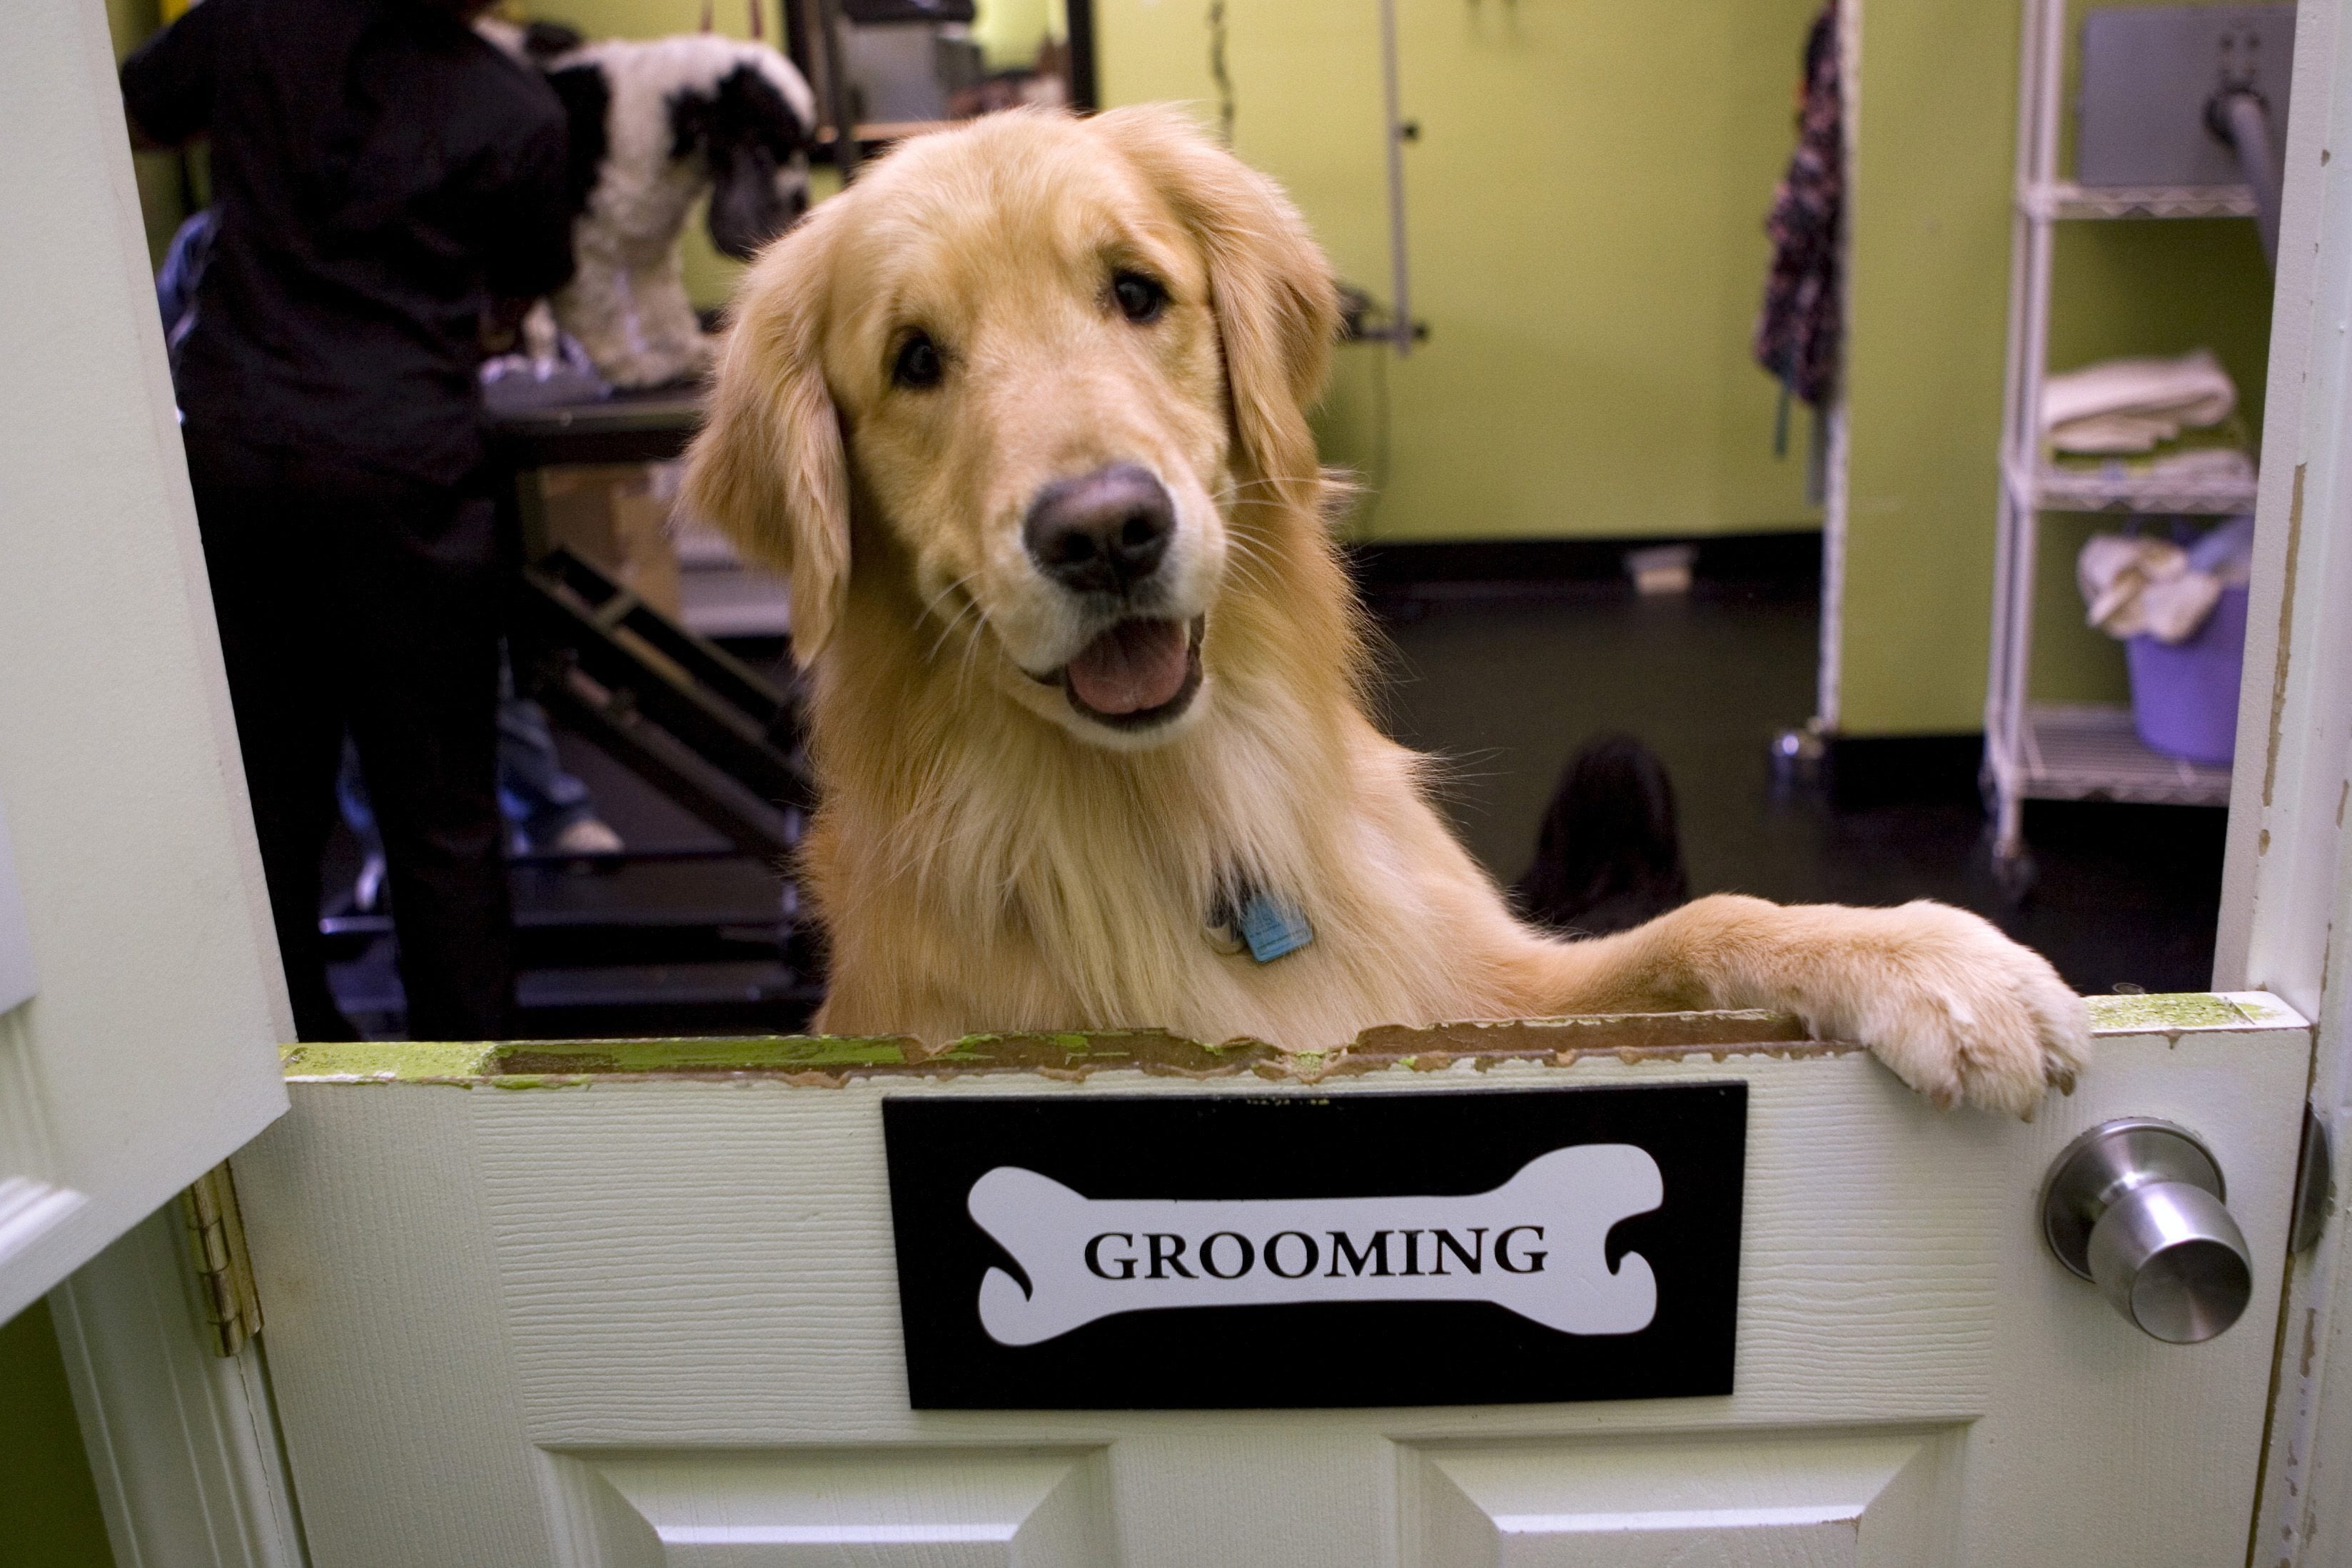 A golden retriever looks over the half door entrance of the grooming room at Happy Paws in Washington. Golden retrievers are the third most popular purebred dog according to the latest American Kennel Club rankings.